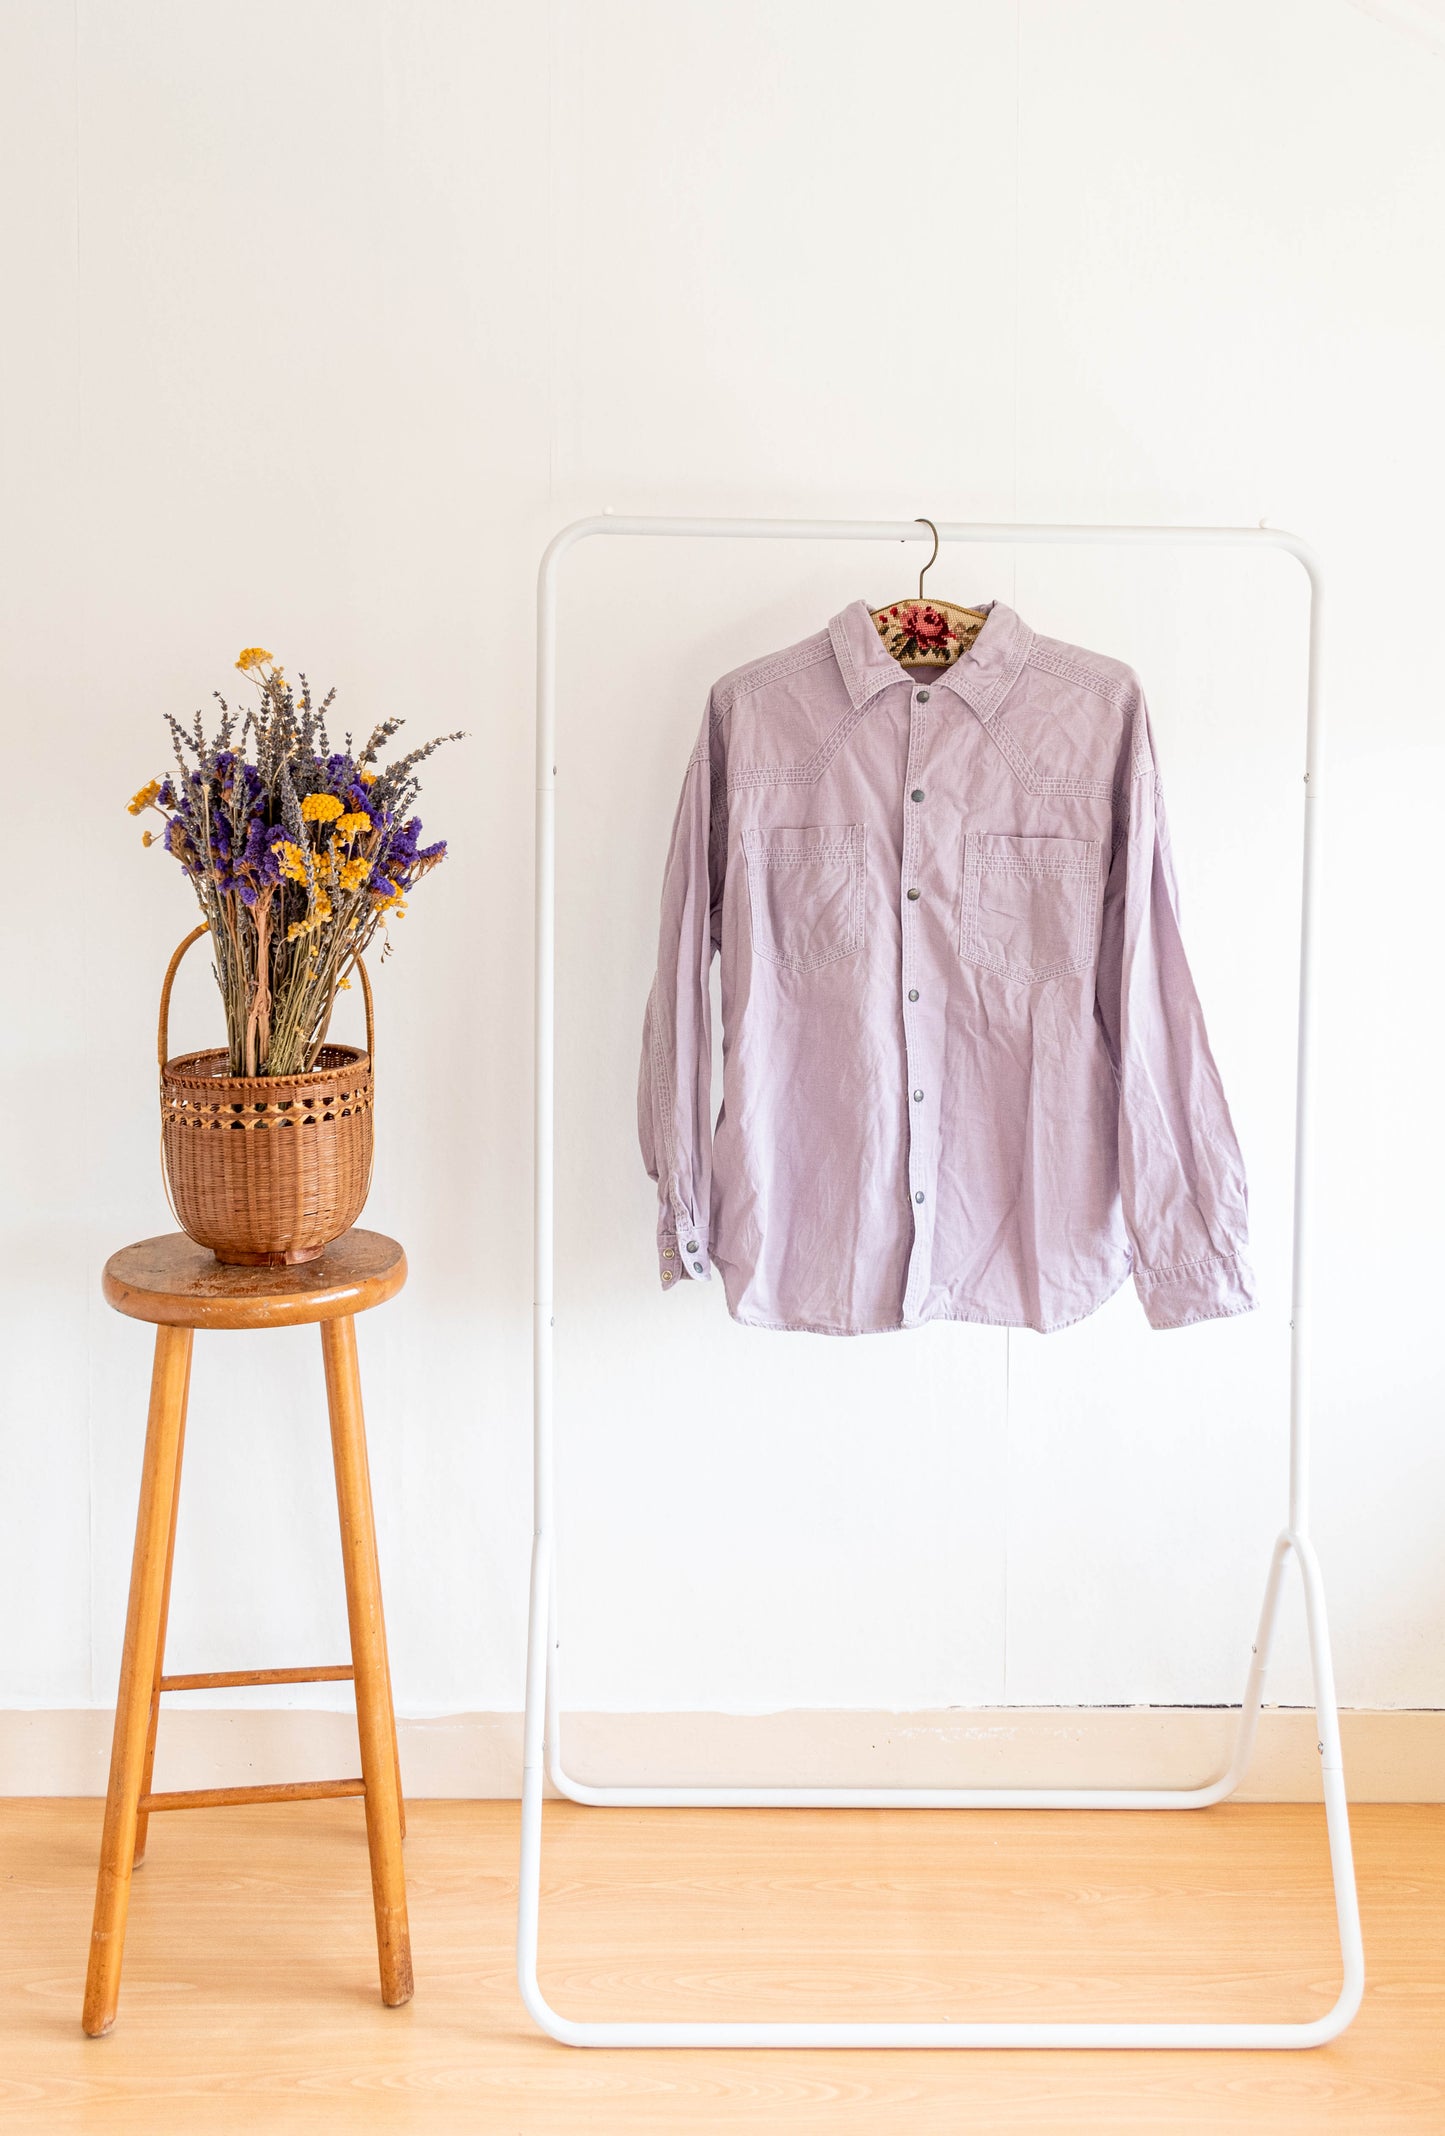 NEW IN! Lilac shirt